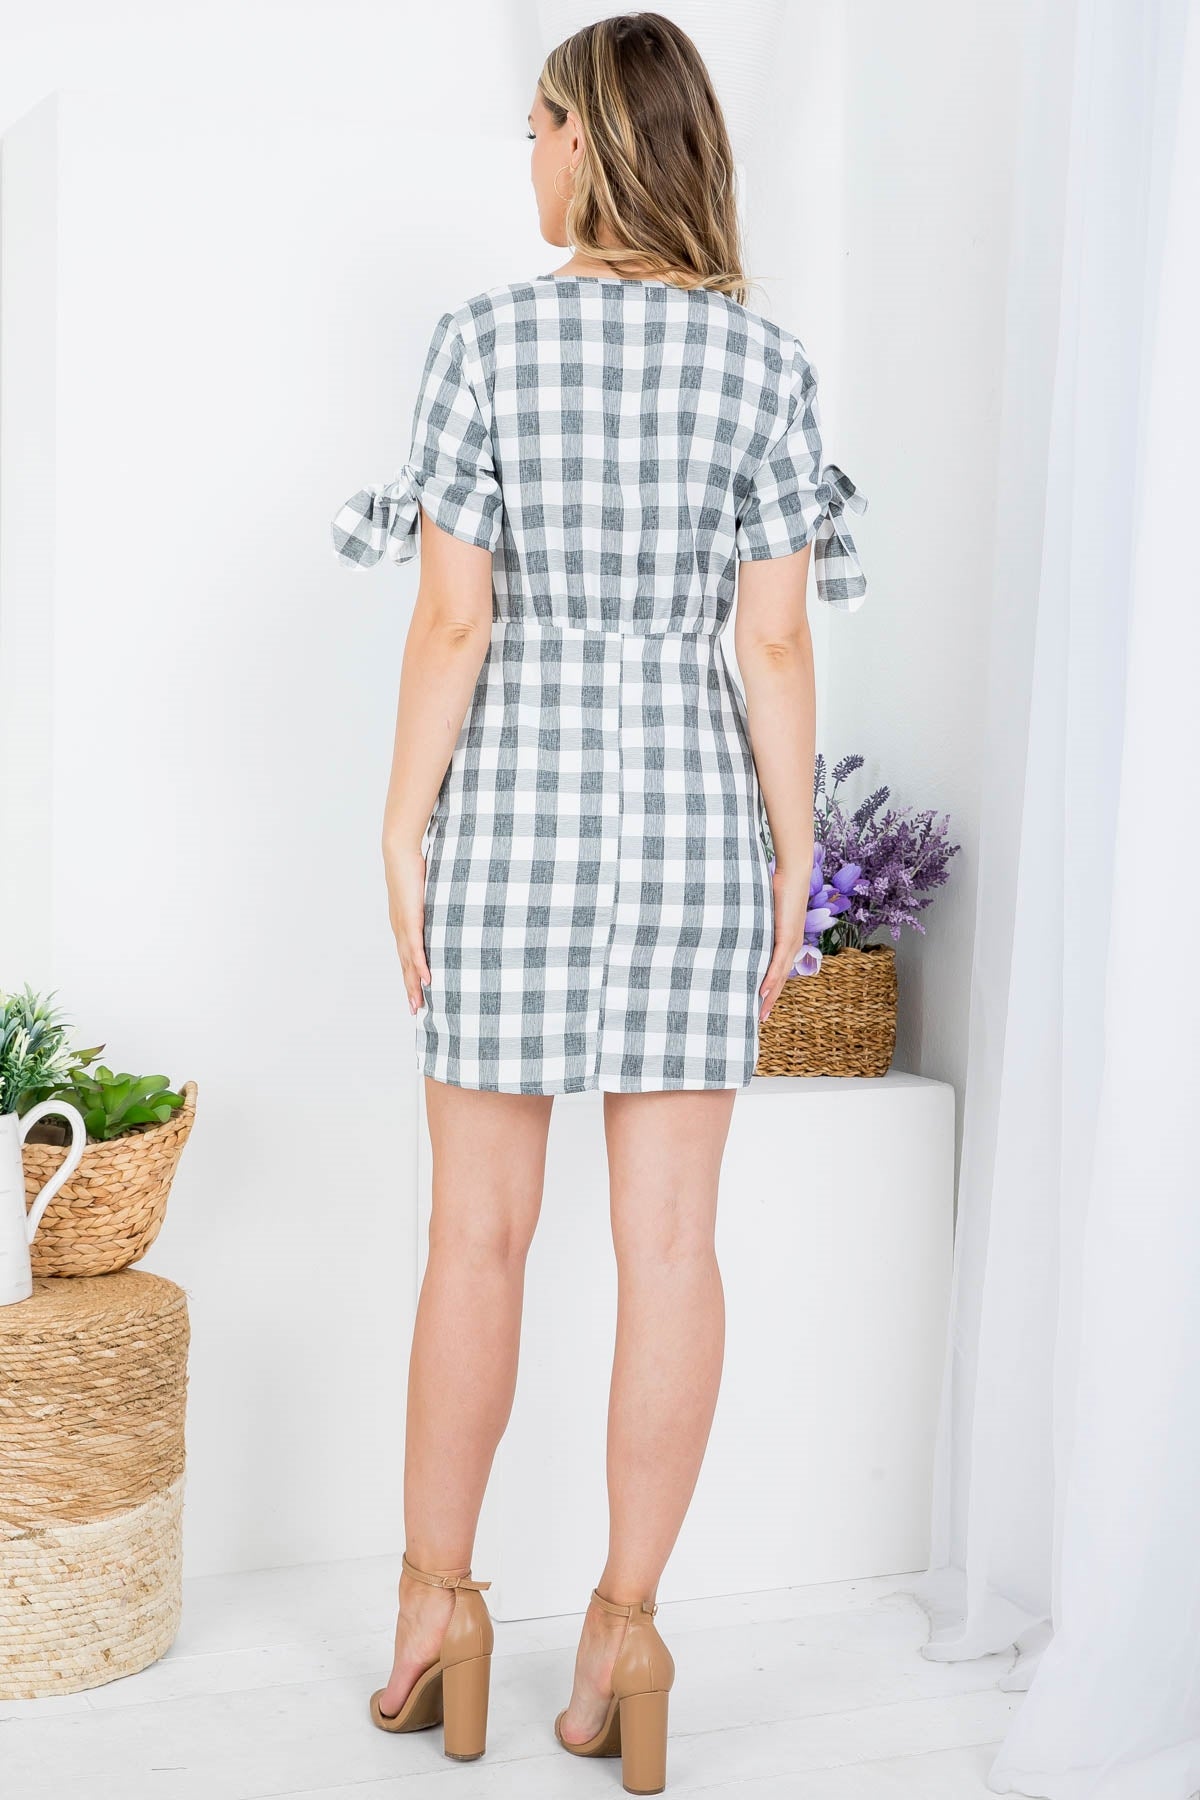 BLACK WHITE CHECKERED PRINT FRONT & SLEEVE TIE KNOT DEEP V-NECKLINE A-LINE DRESS (NOW $2.00 ONLY!)